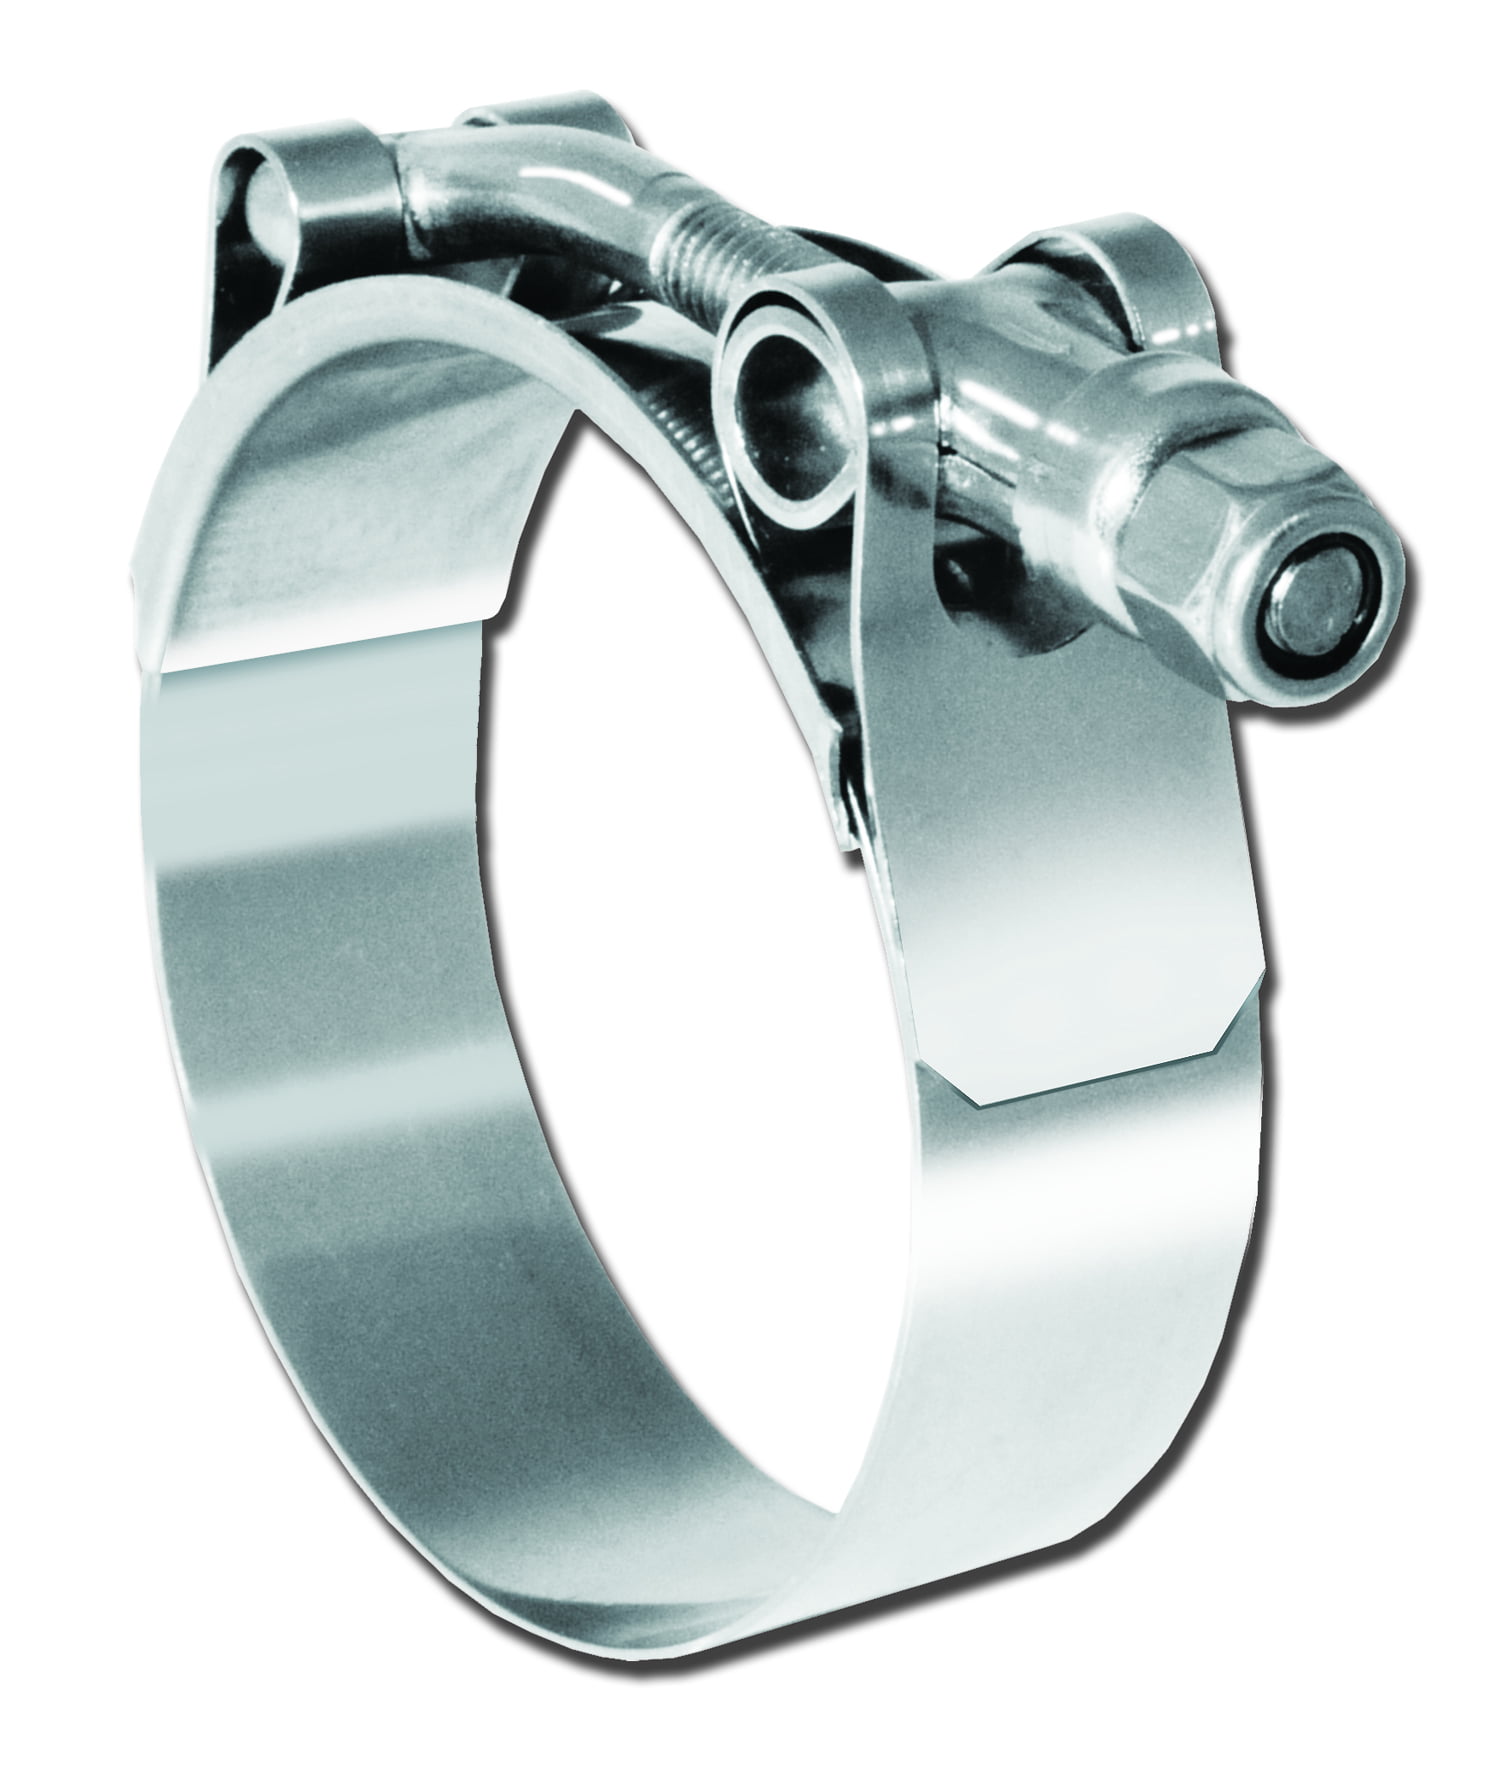 Pro Tie 33740 T-Bolt All Stainless Hose Clamp SAE Size 148 5-13/16-Inch Range 5-1/2-Inch 